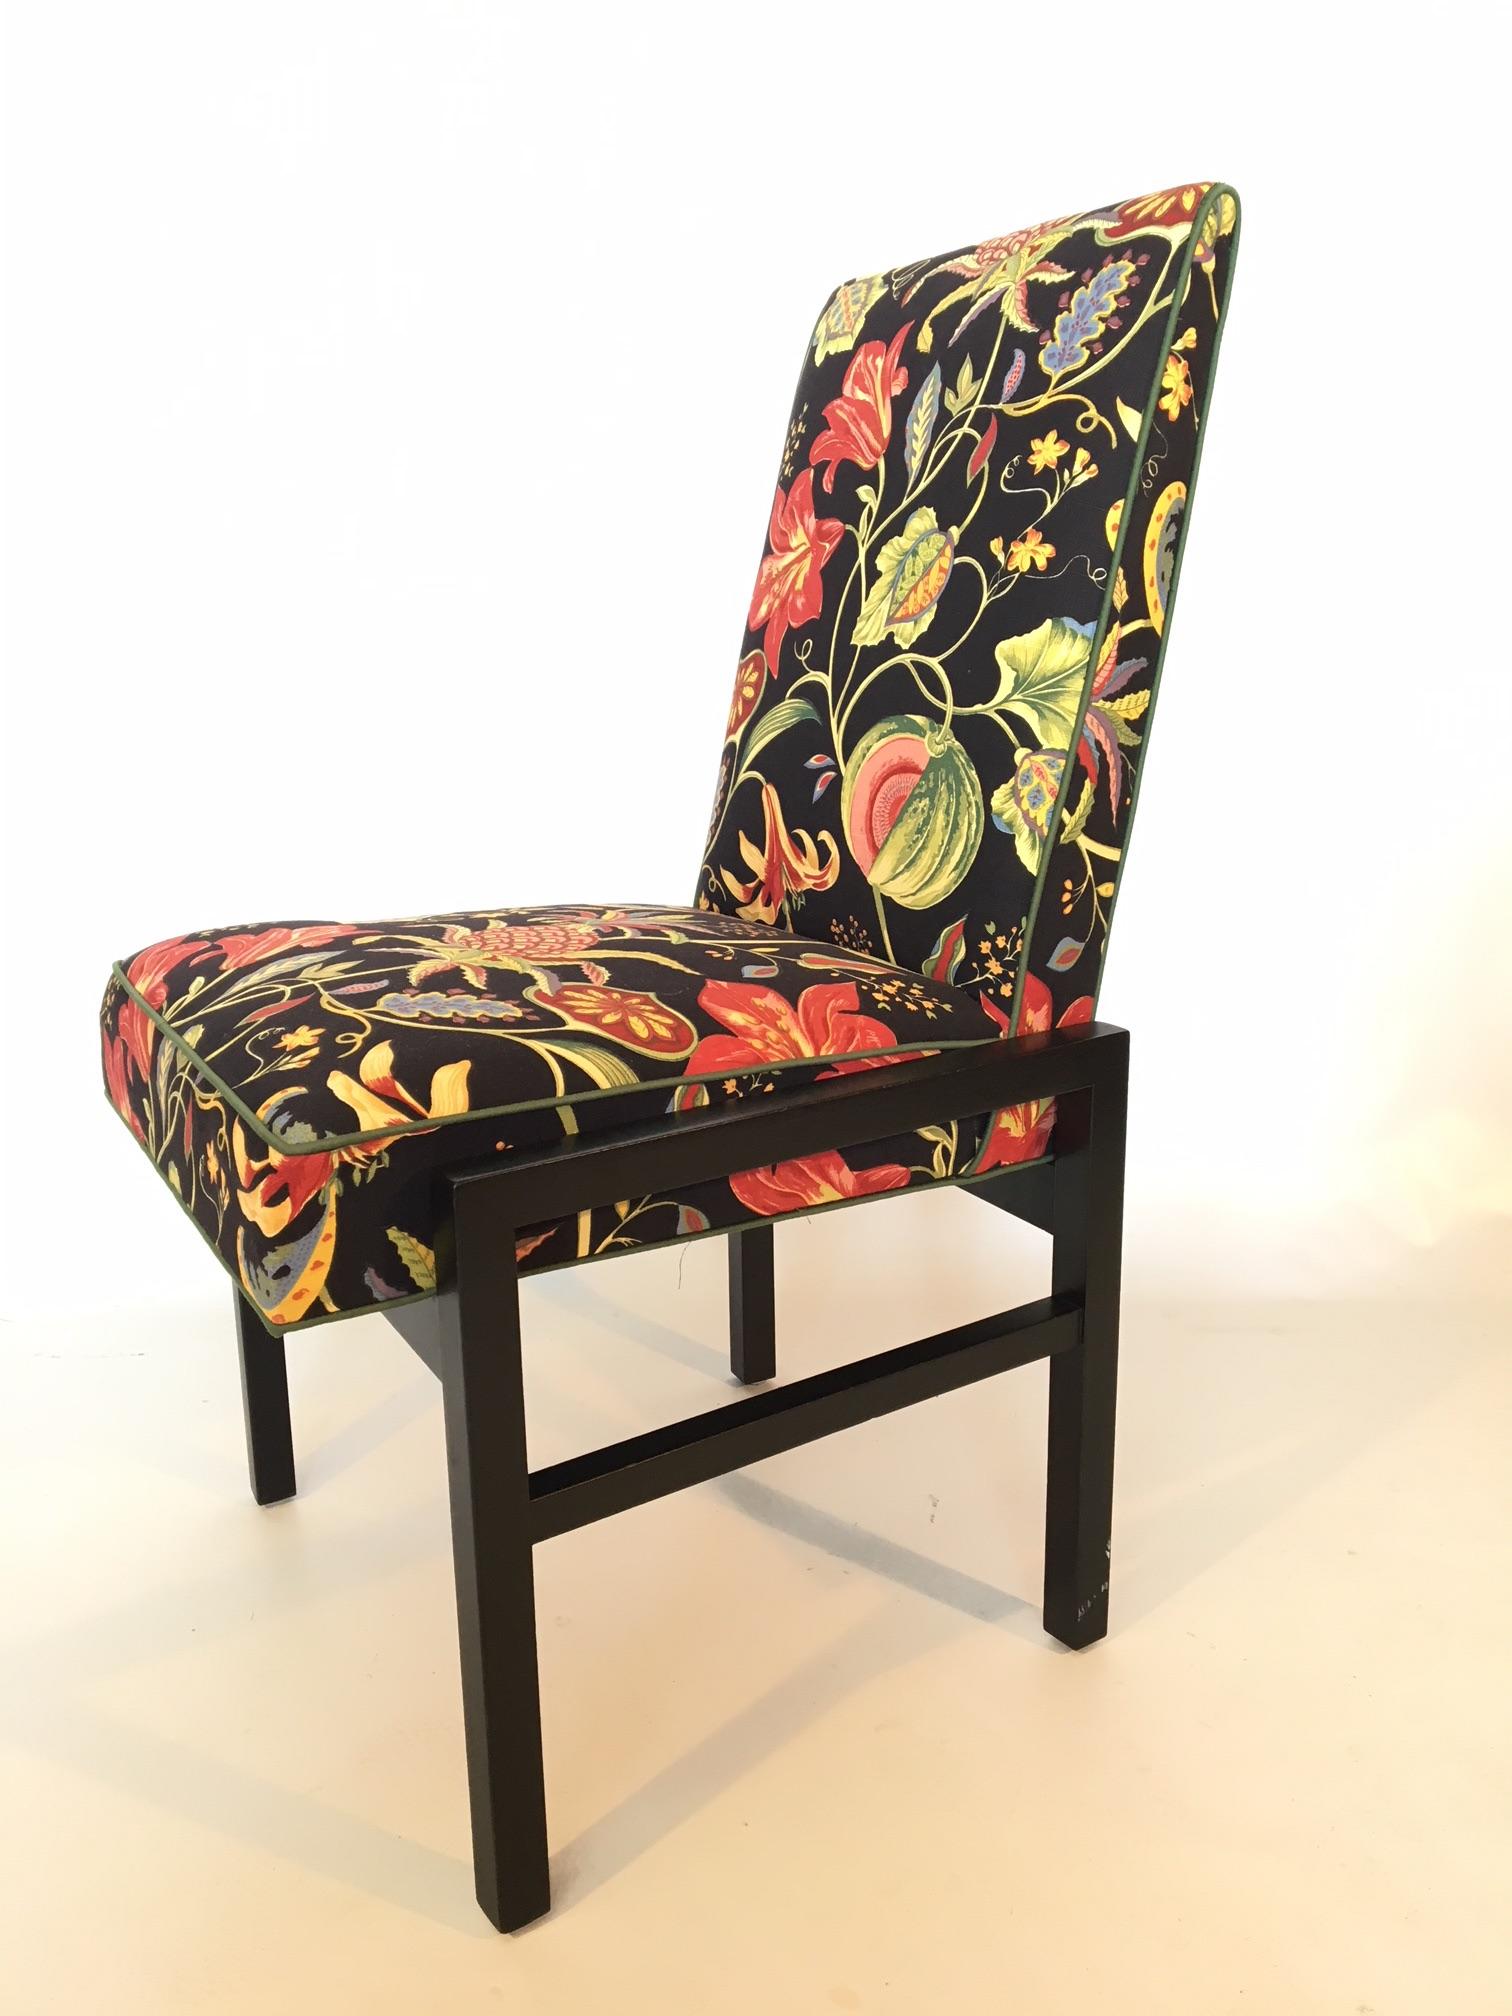 Set of 6 Directional dining chairs with black wood frames upholstered in a vibrant floral print on a black background. Very good condition with very minor signs of age appropriate wear. Fabric in near perfect condition.